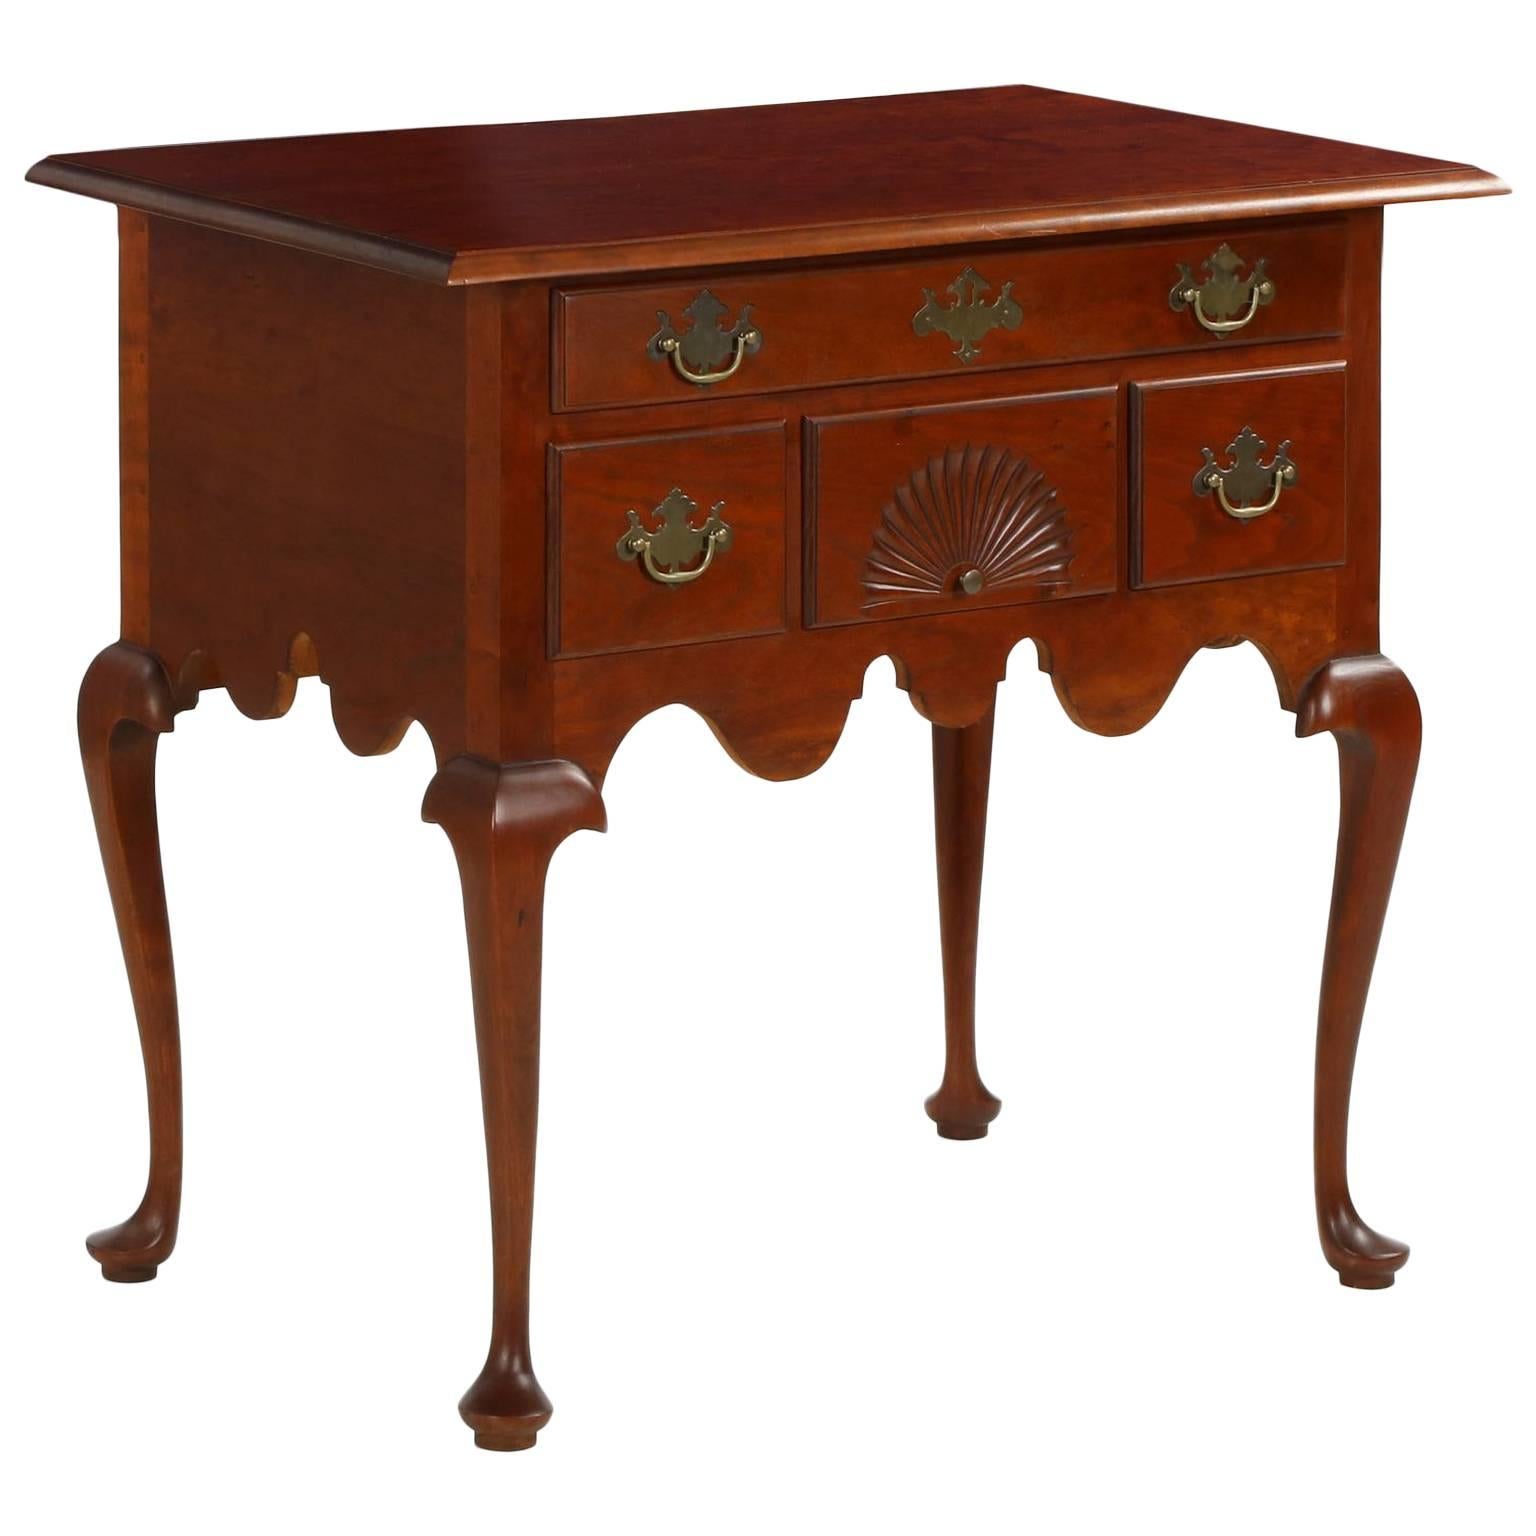 Eldred Wheeler Cherry Fan Carved Connecticut Lowboy Chest of Drawers